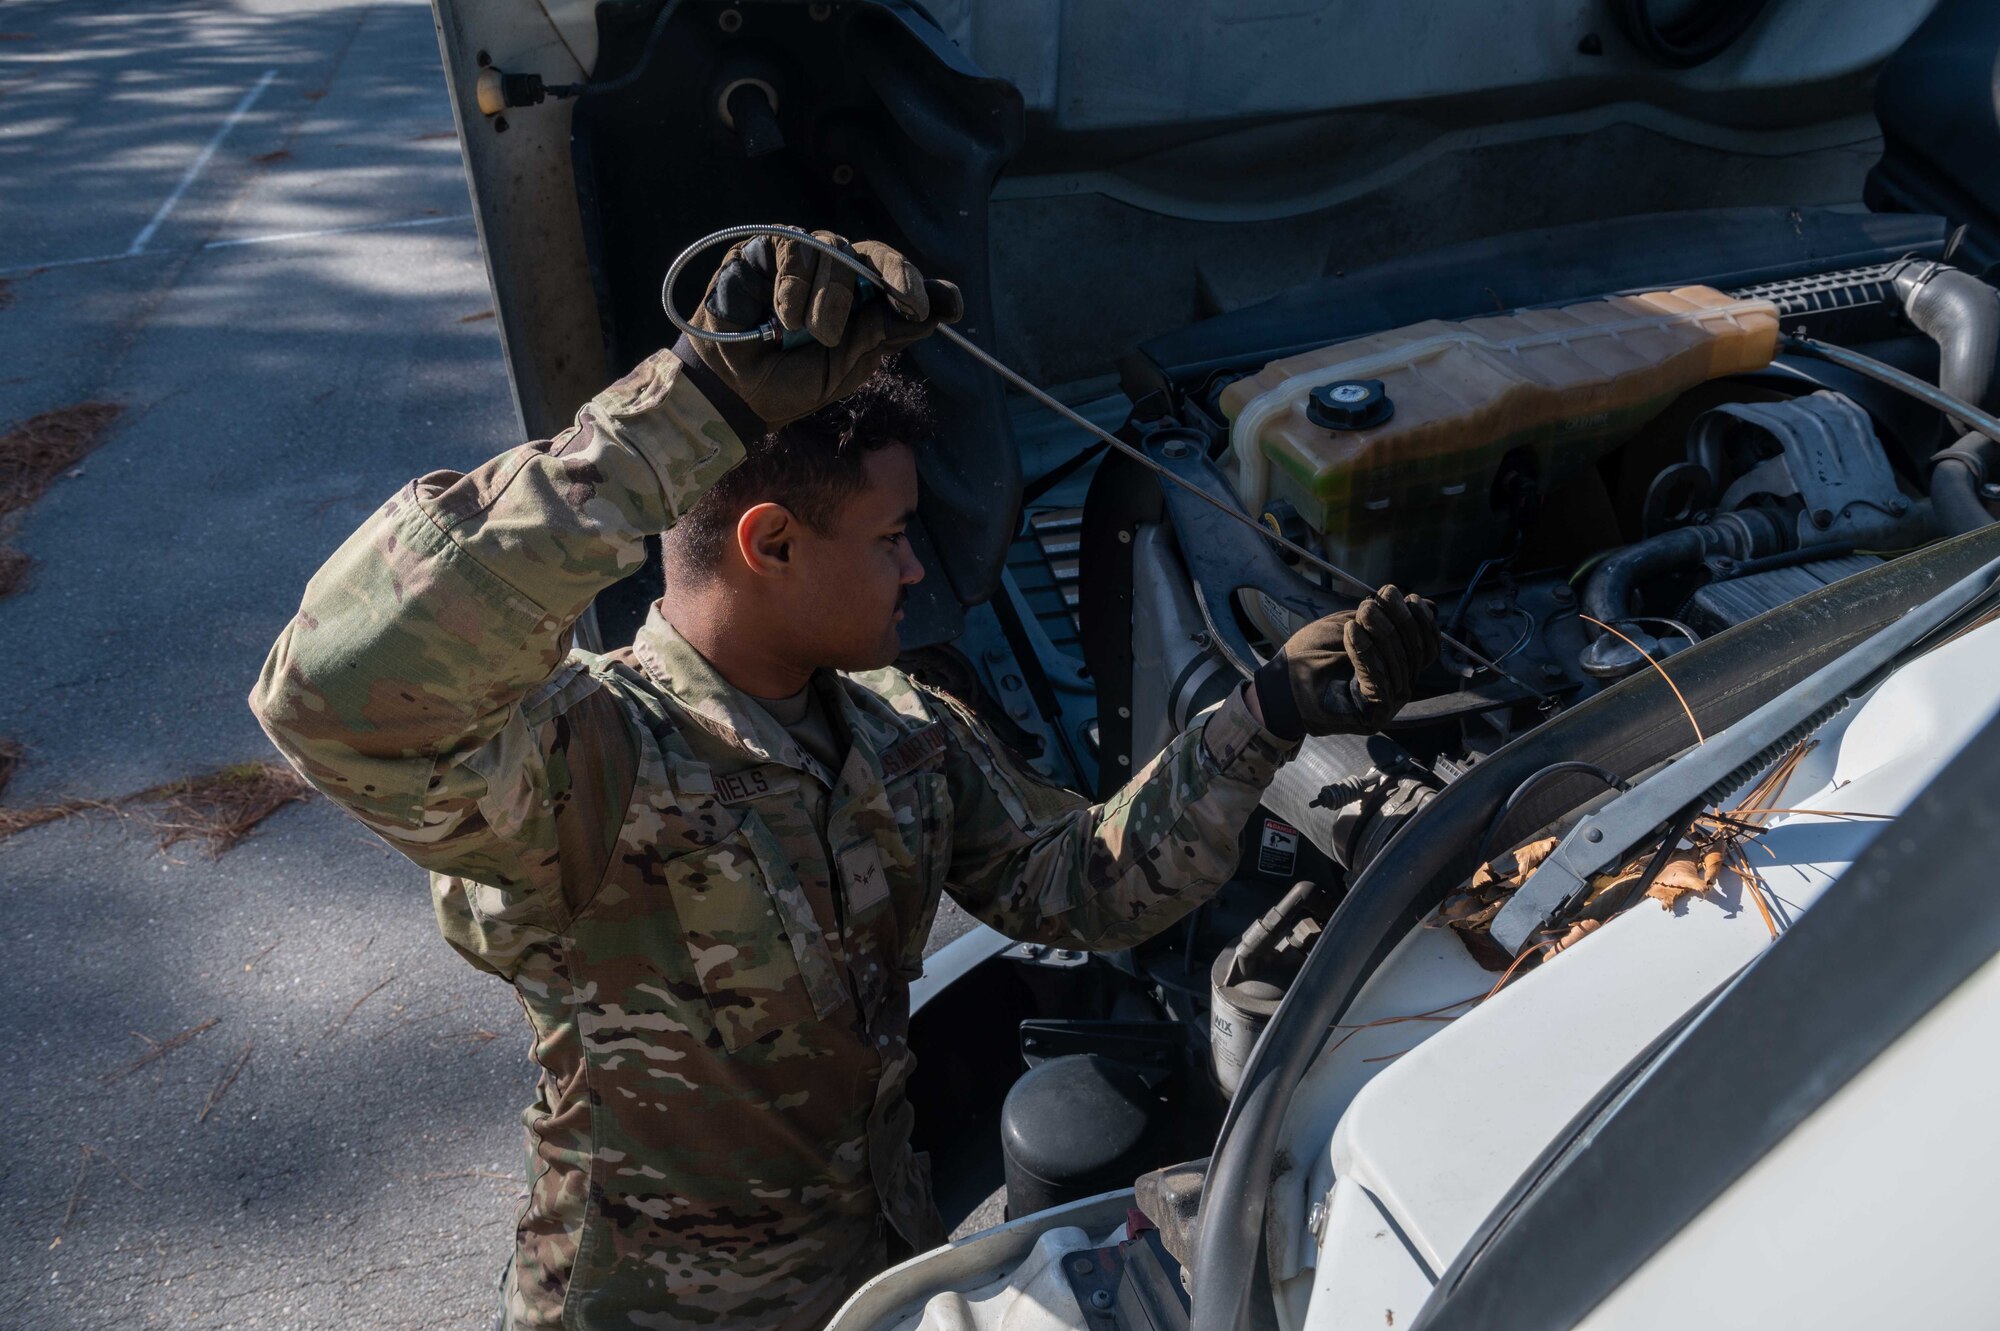 Airman 1st Class Lamar Daniels, 4th Logistics Readiness Squadron ground transportation vehicle operator, checks fuels on 10-ton tractor (semi) at Seymour Johnson Air Force Base, North Carolina, Dec. 3, 2021. The 4th LRS controls the receipt, storage and issue of 45 million gallons of fuel and cryogenics annually. (U.S. Air Force photo by Airman 1st Class Sabrina Fuller)